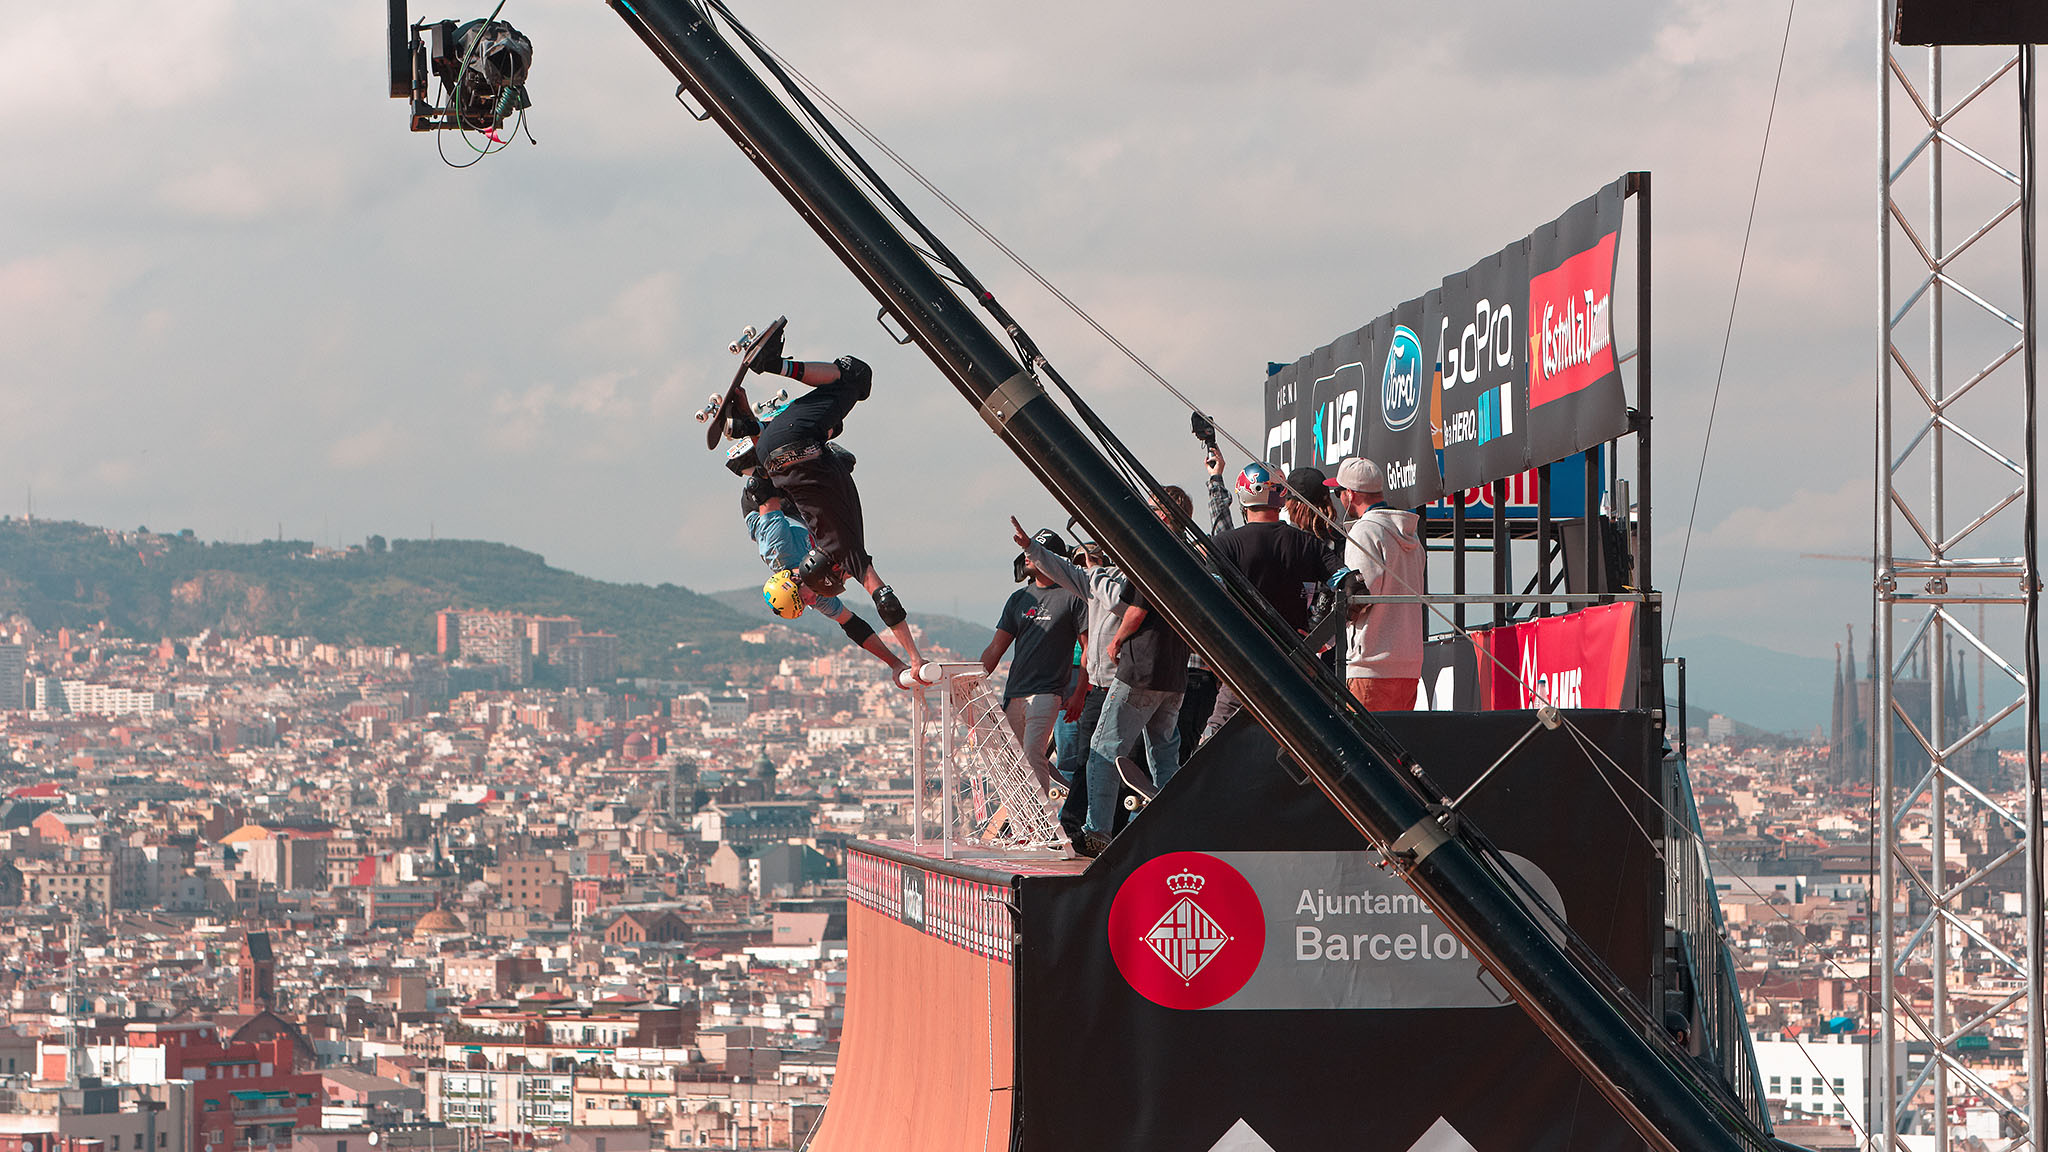 The best photos from X Games Barcelona-Travis Pastrana